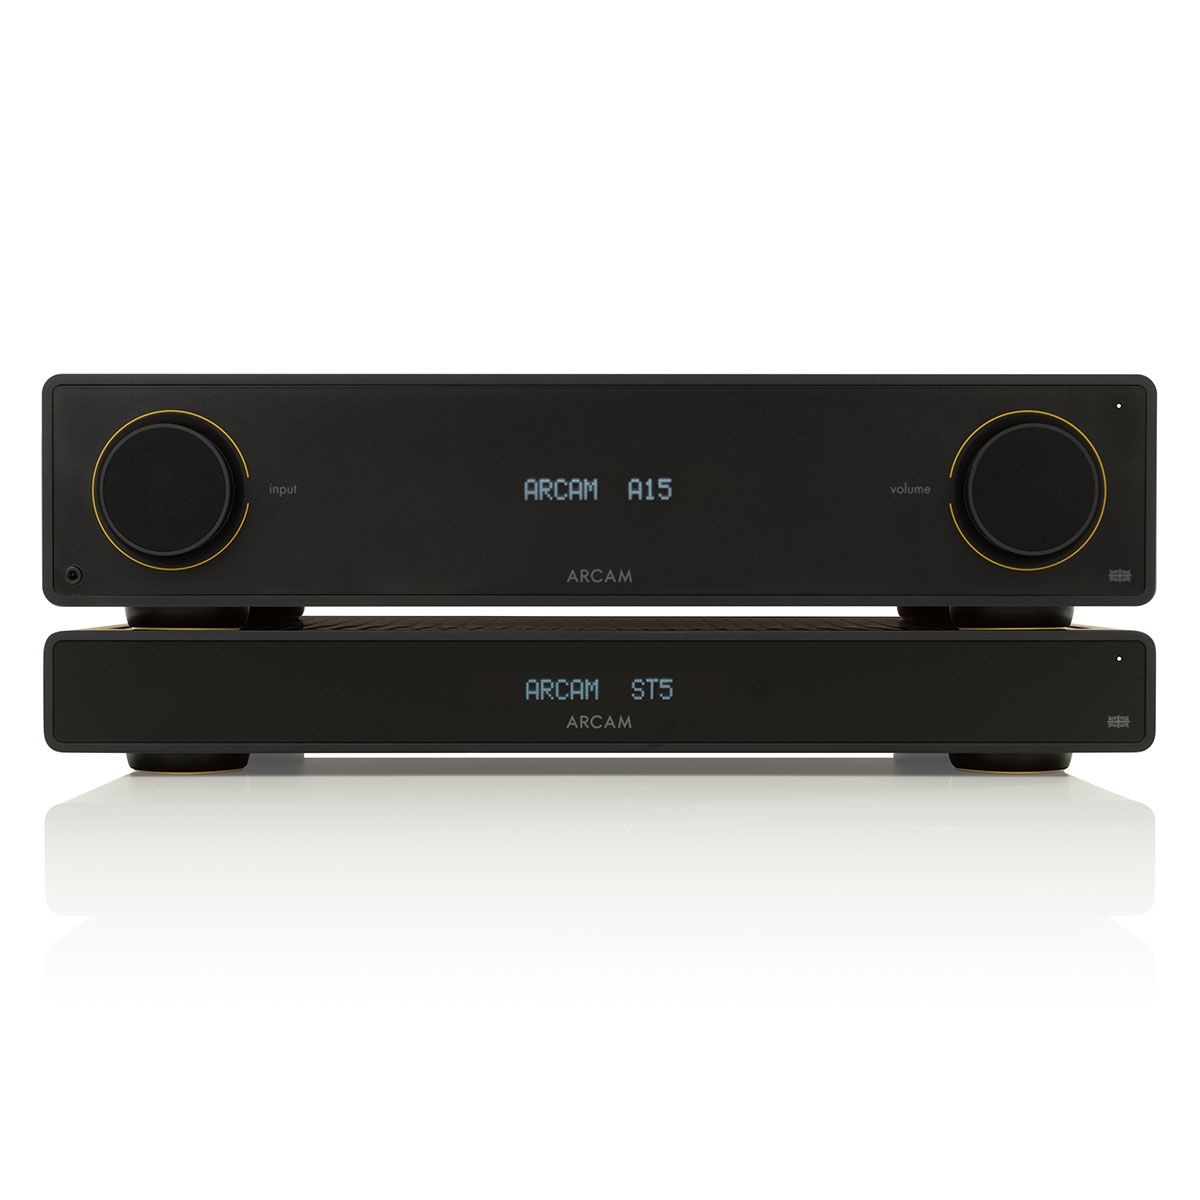 Arcam ST5 Streaming Music Player stacked with Arcam A15